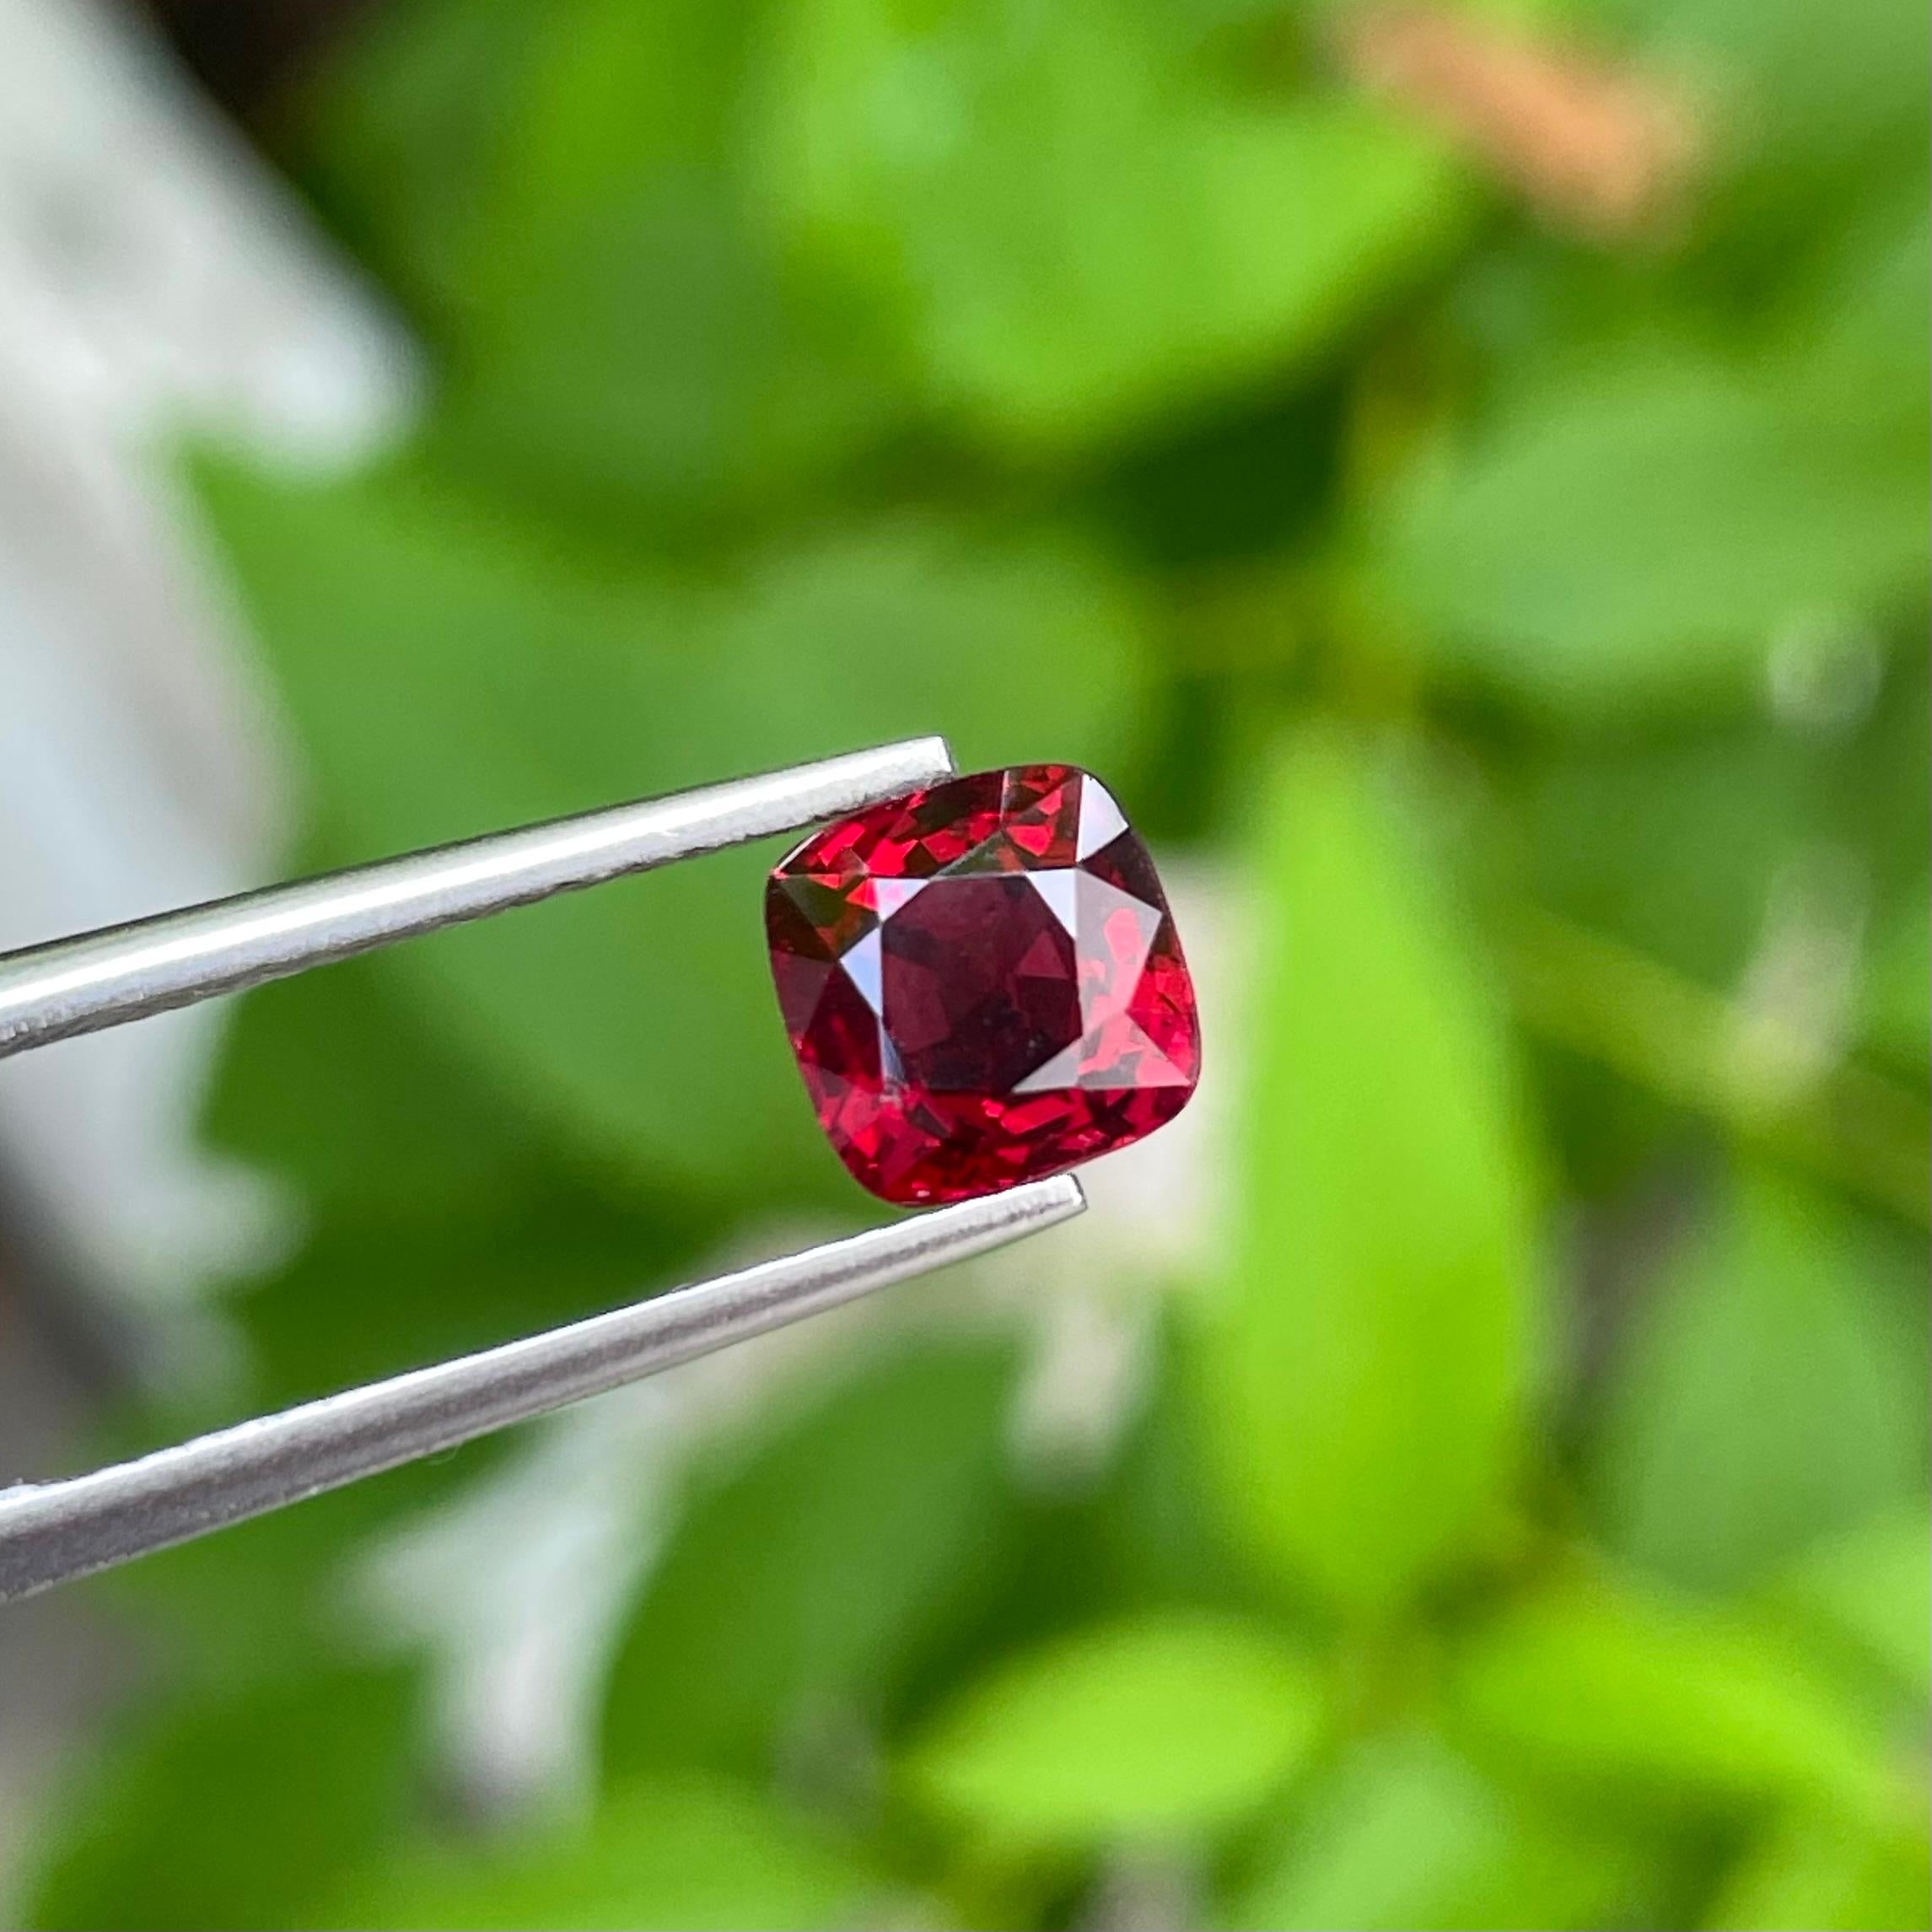 Weight 1.75 carats 
Dimensions 6.77 x 6.78 x 4.3 mm
Treatment None 
Origin Burma (Myanmar)
Clarity VVS (Very, Very Slightly Included)
Shape Cushion
Cut Fancy Cushion



Elevate your jewelry collection with this stunning Red Burmese Spinel, a true